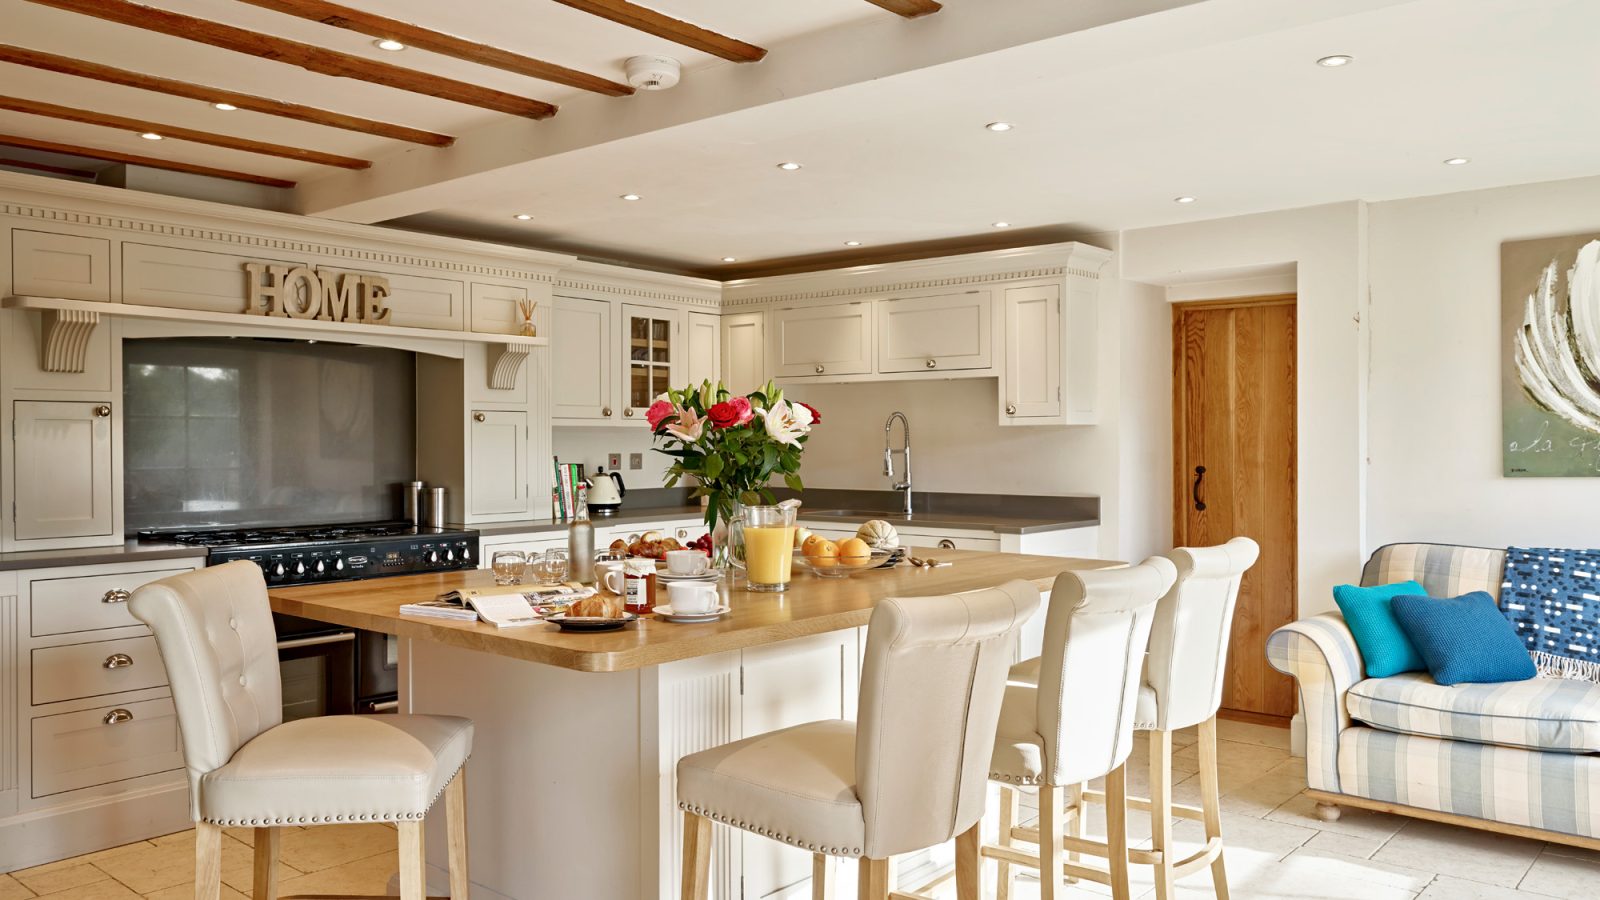  Cotswold Valley Court - kate & tom's Large Holiday Homes